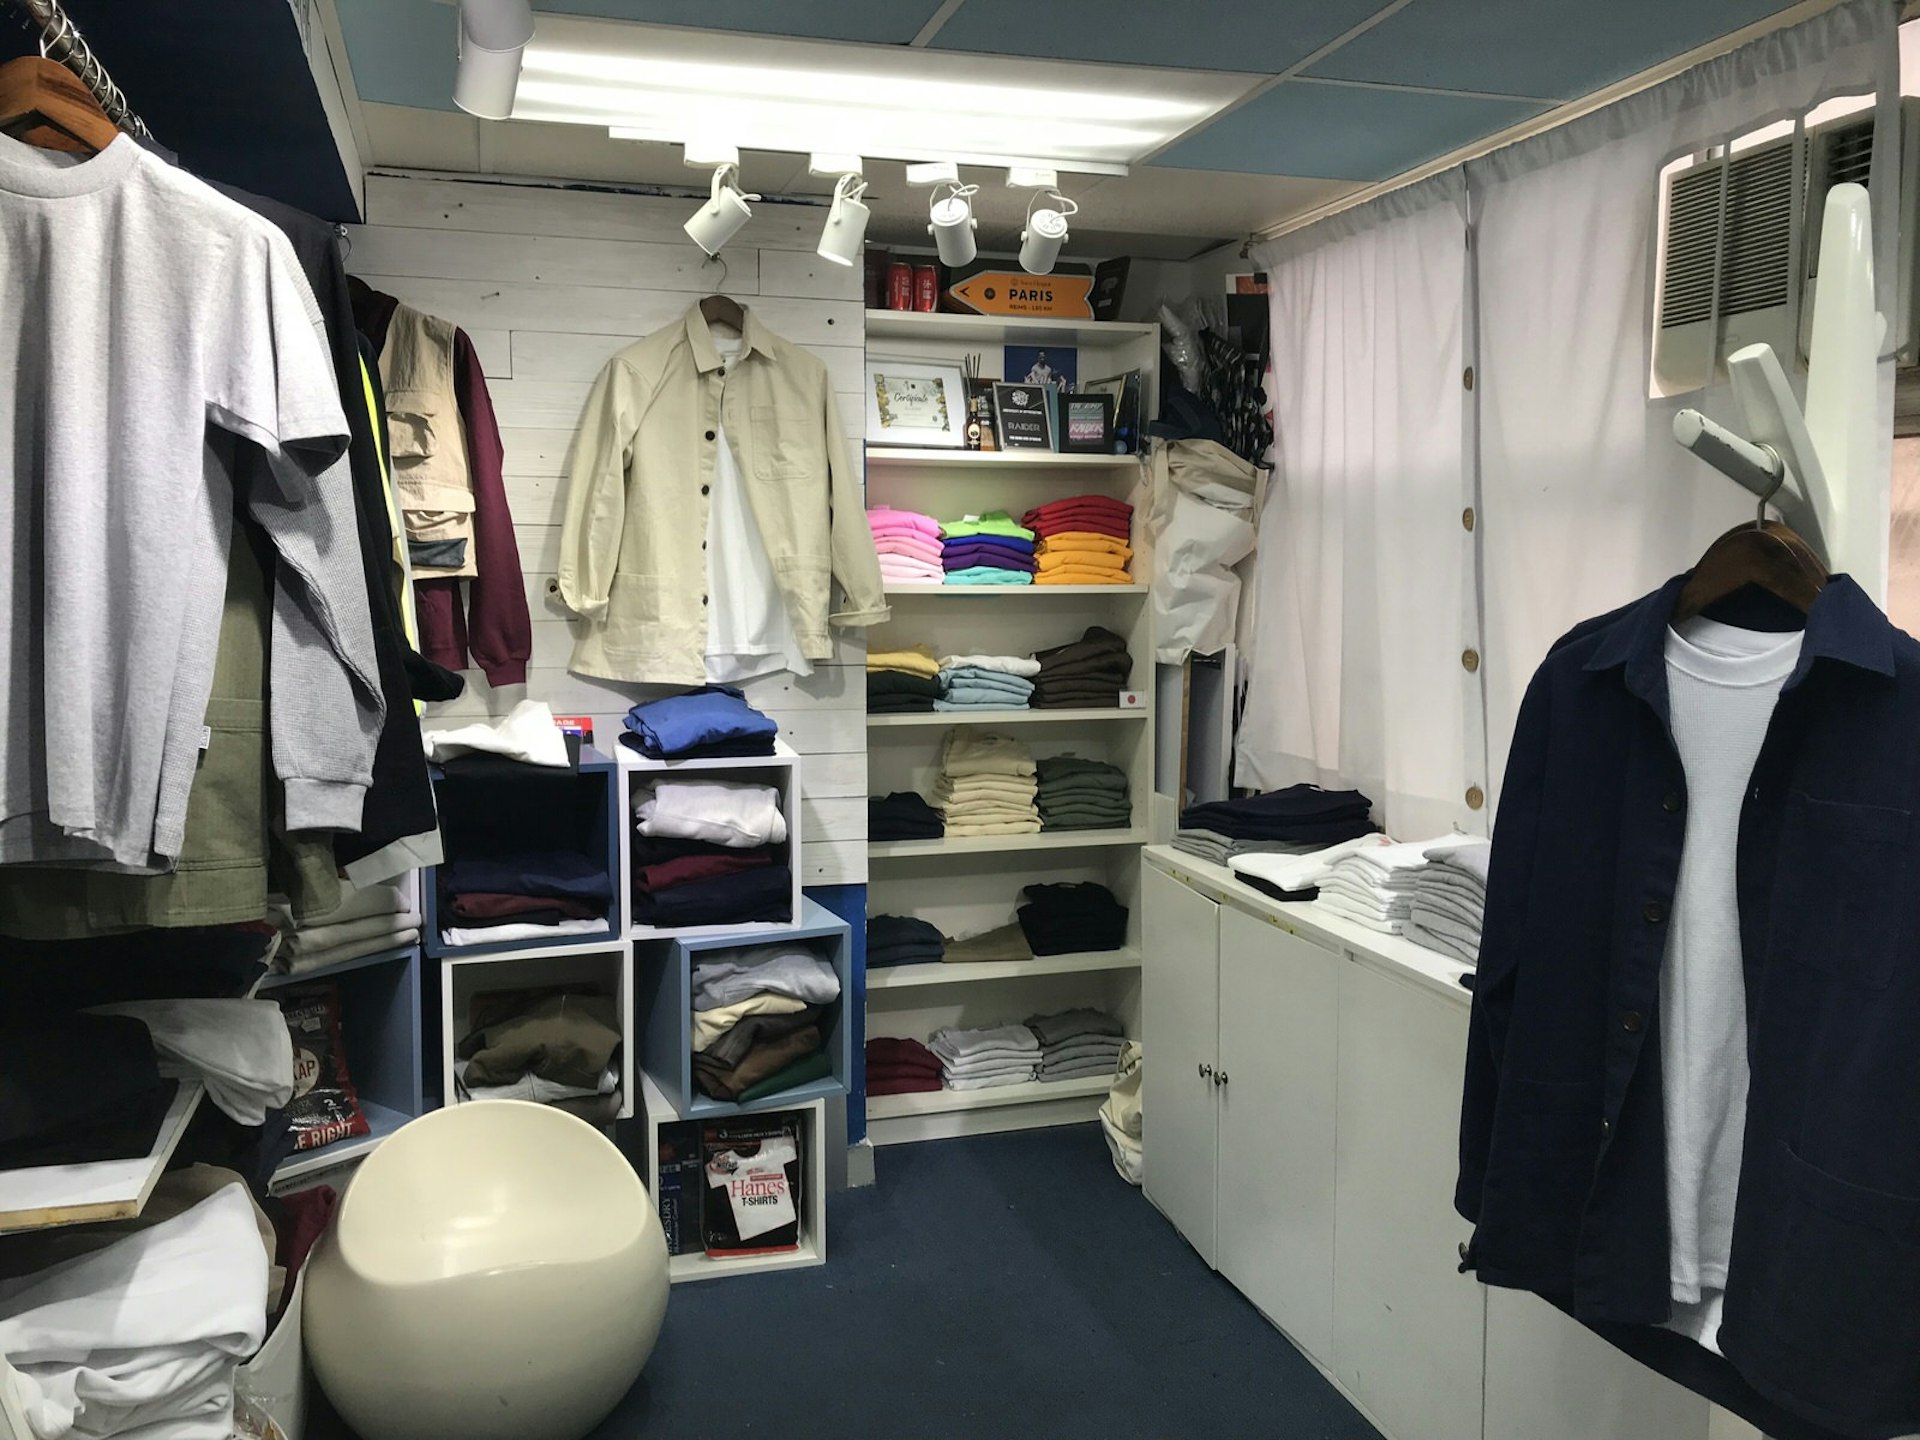 A windowless room with white shelves full of clothes and accessories